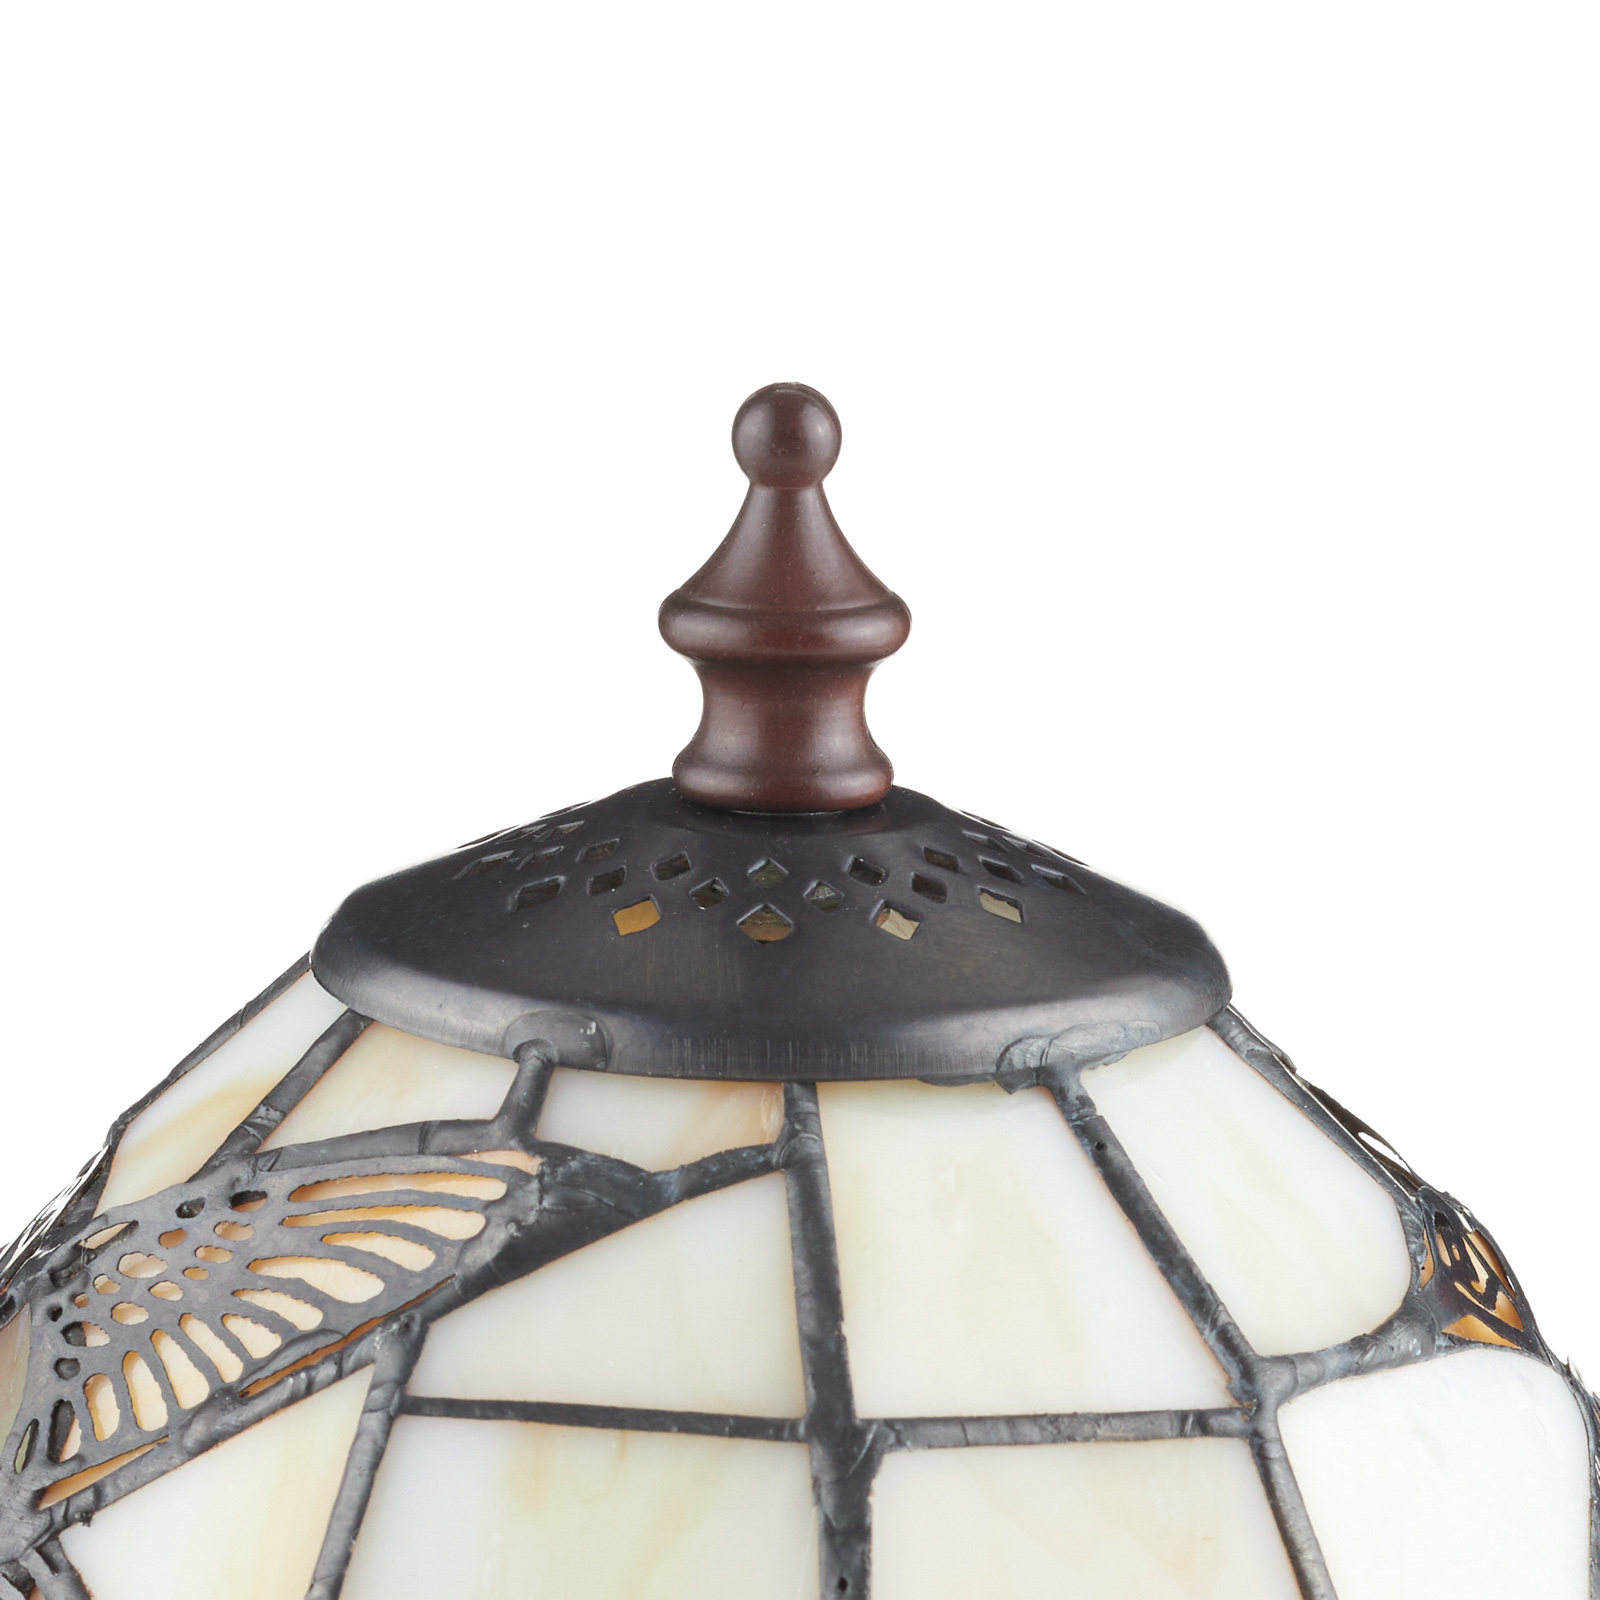 IRENA beautiful table lamp in the Tiffany style